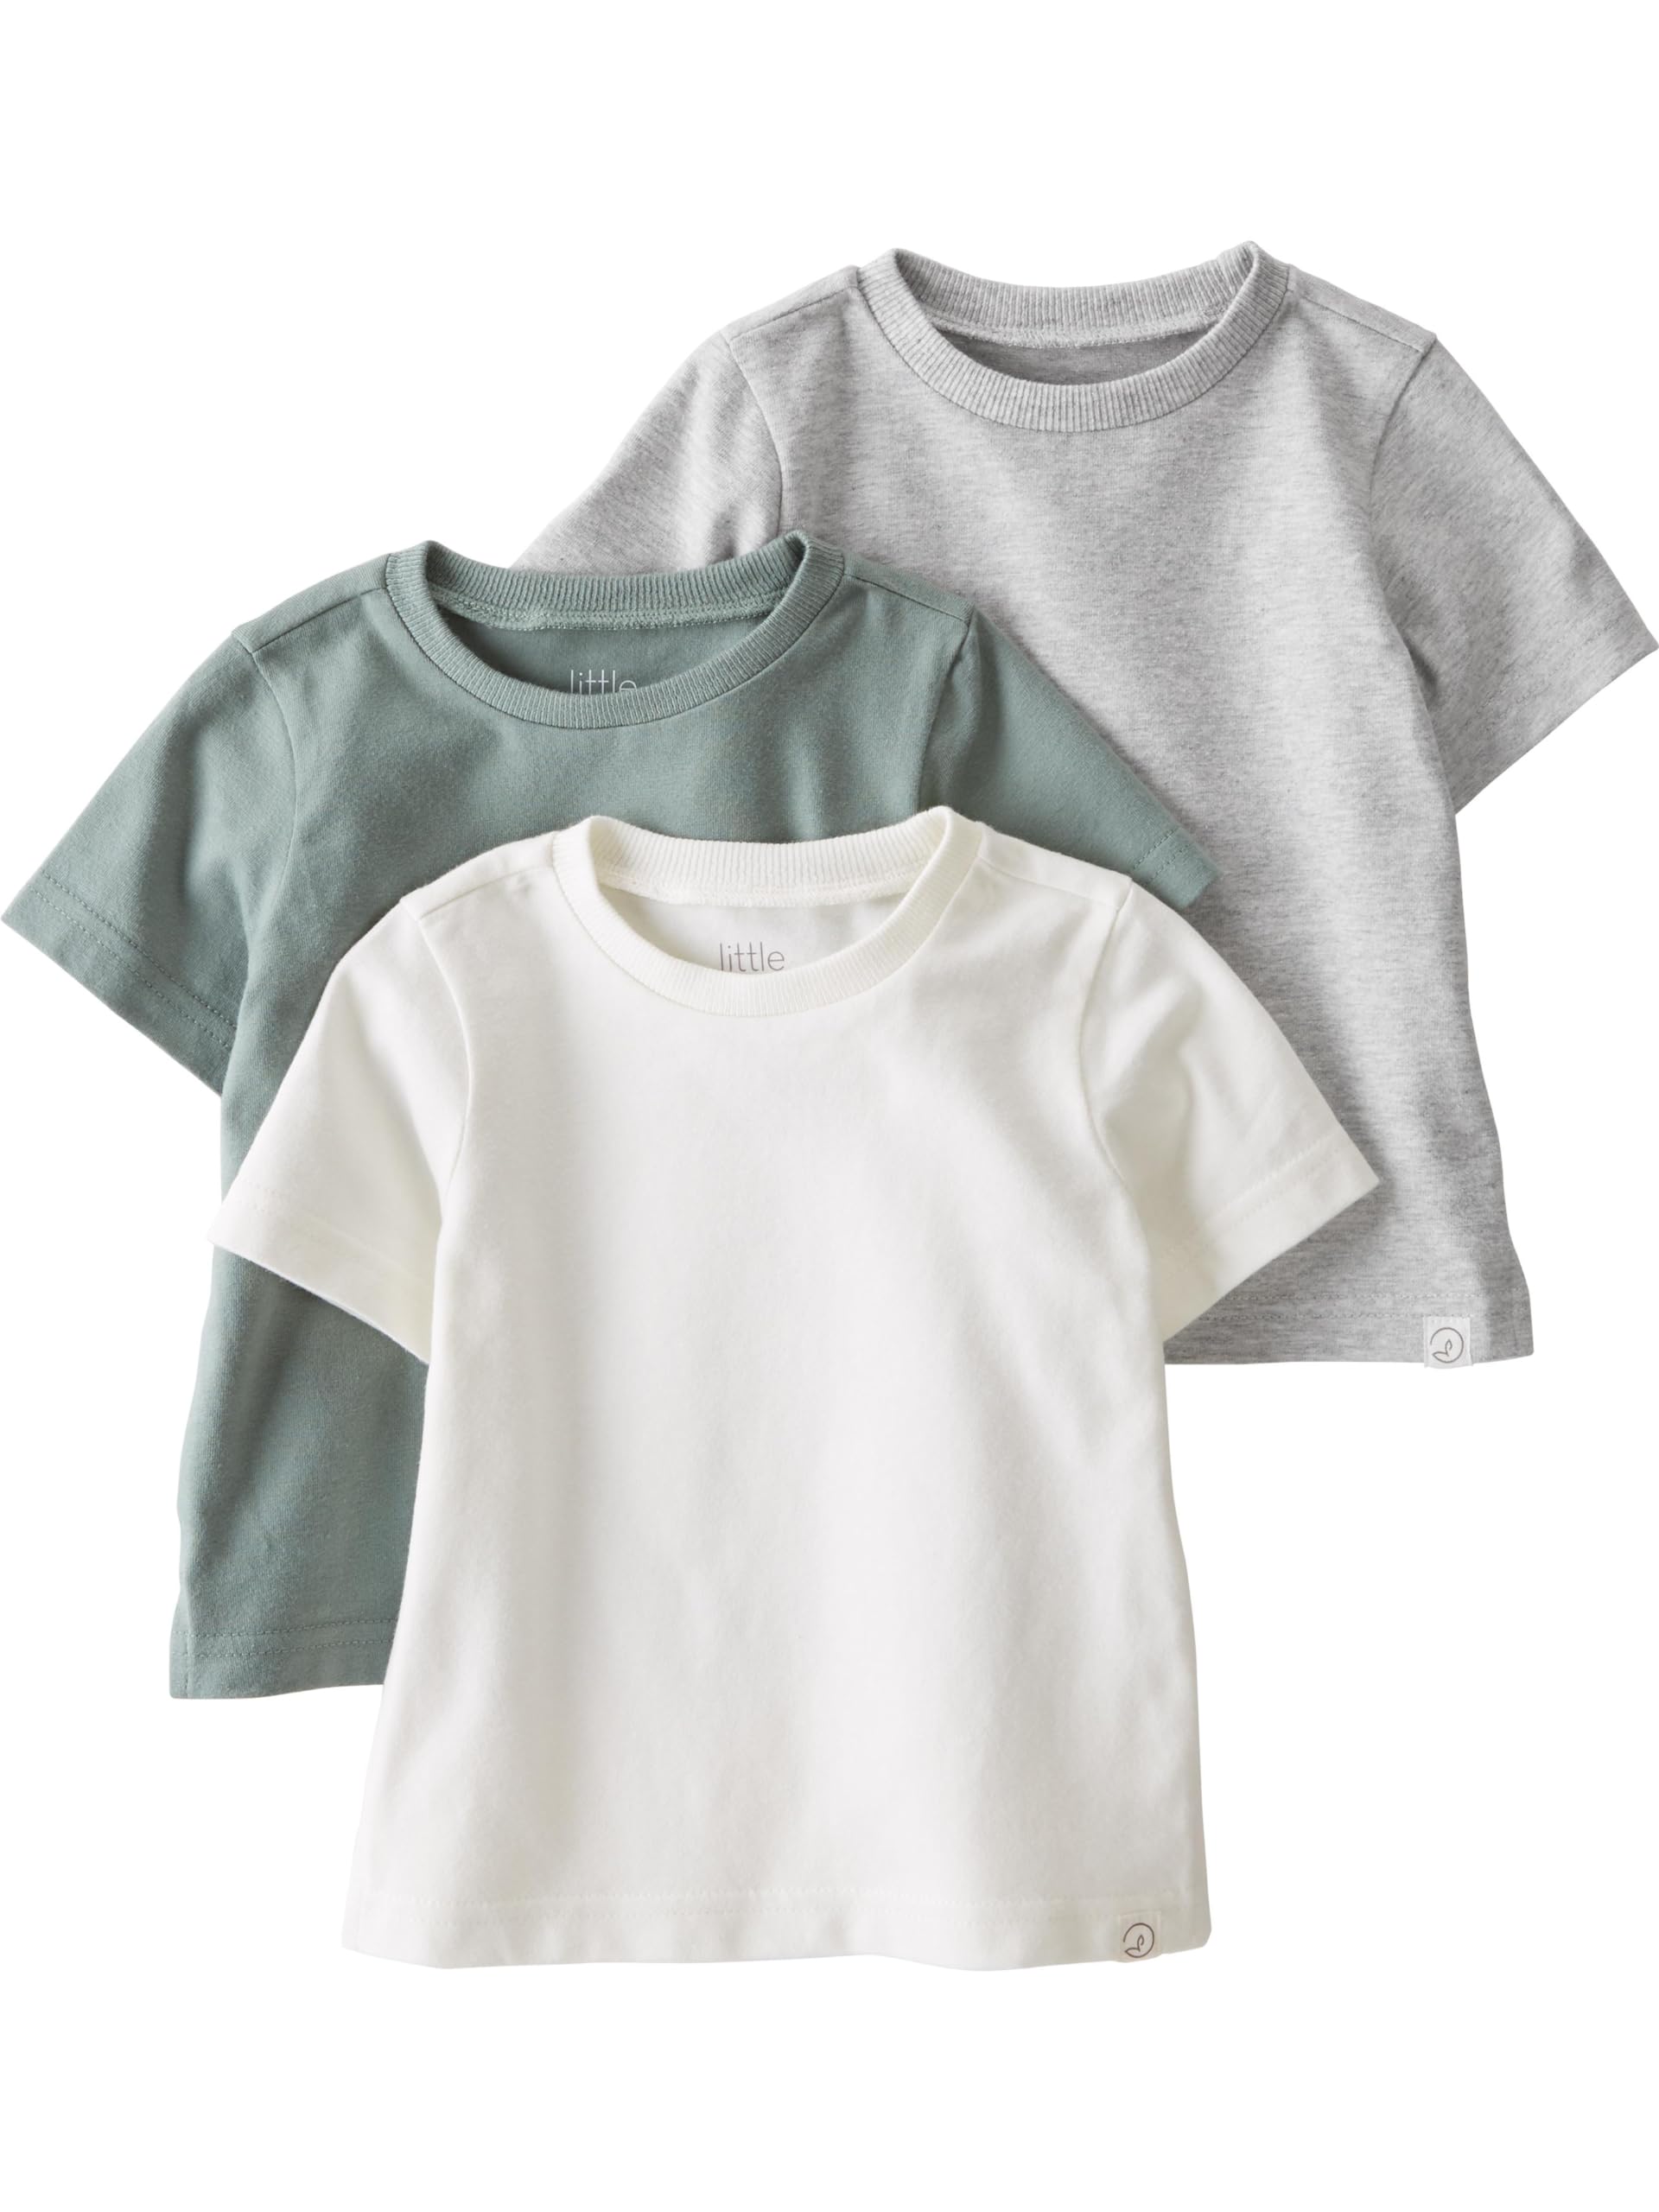 little planet by carter's Unisex Baby Tee